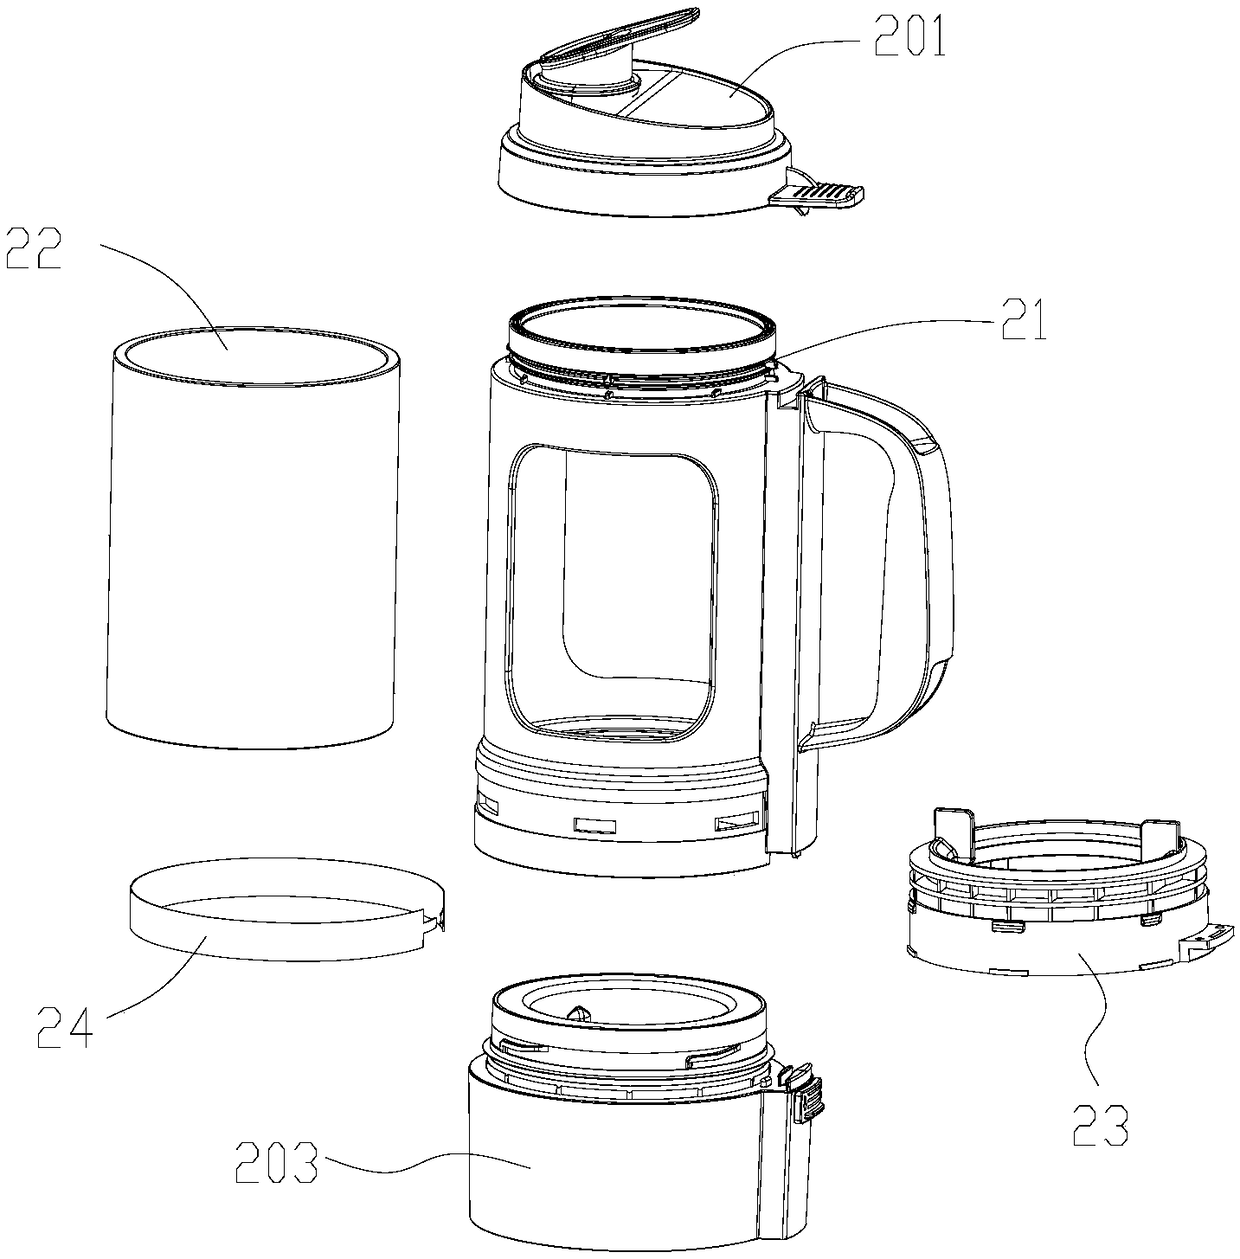 Cup assembly and food high-speed blender